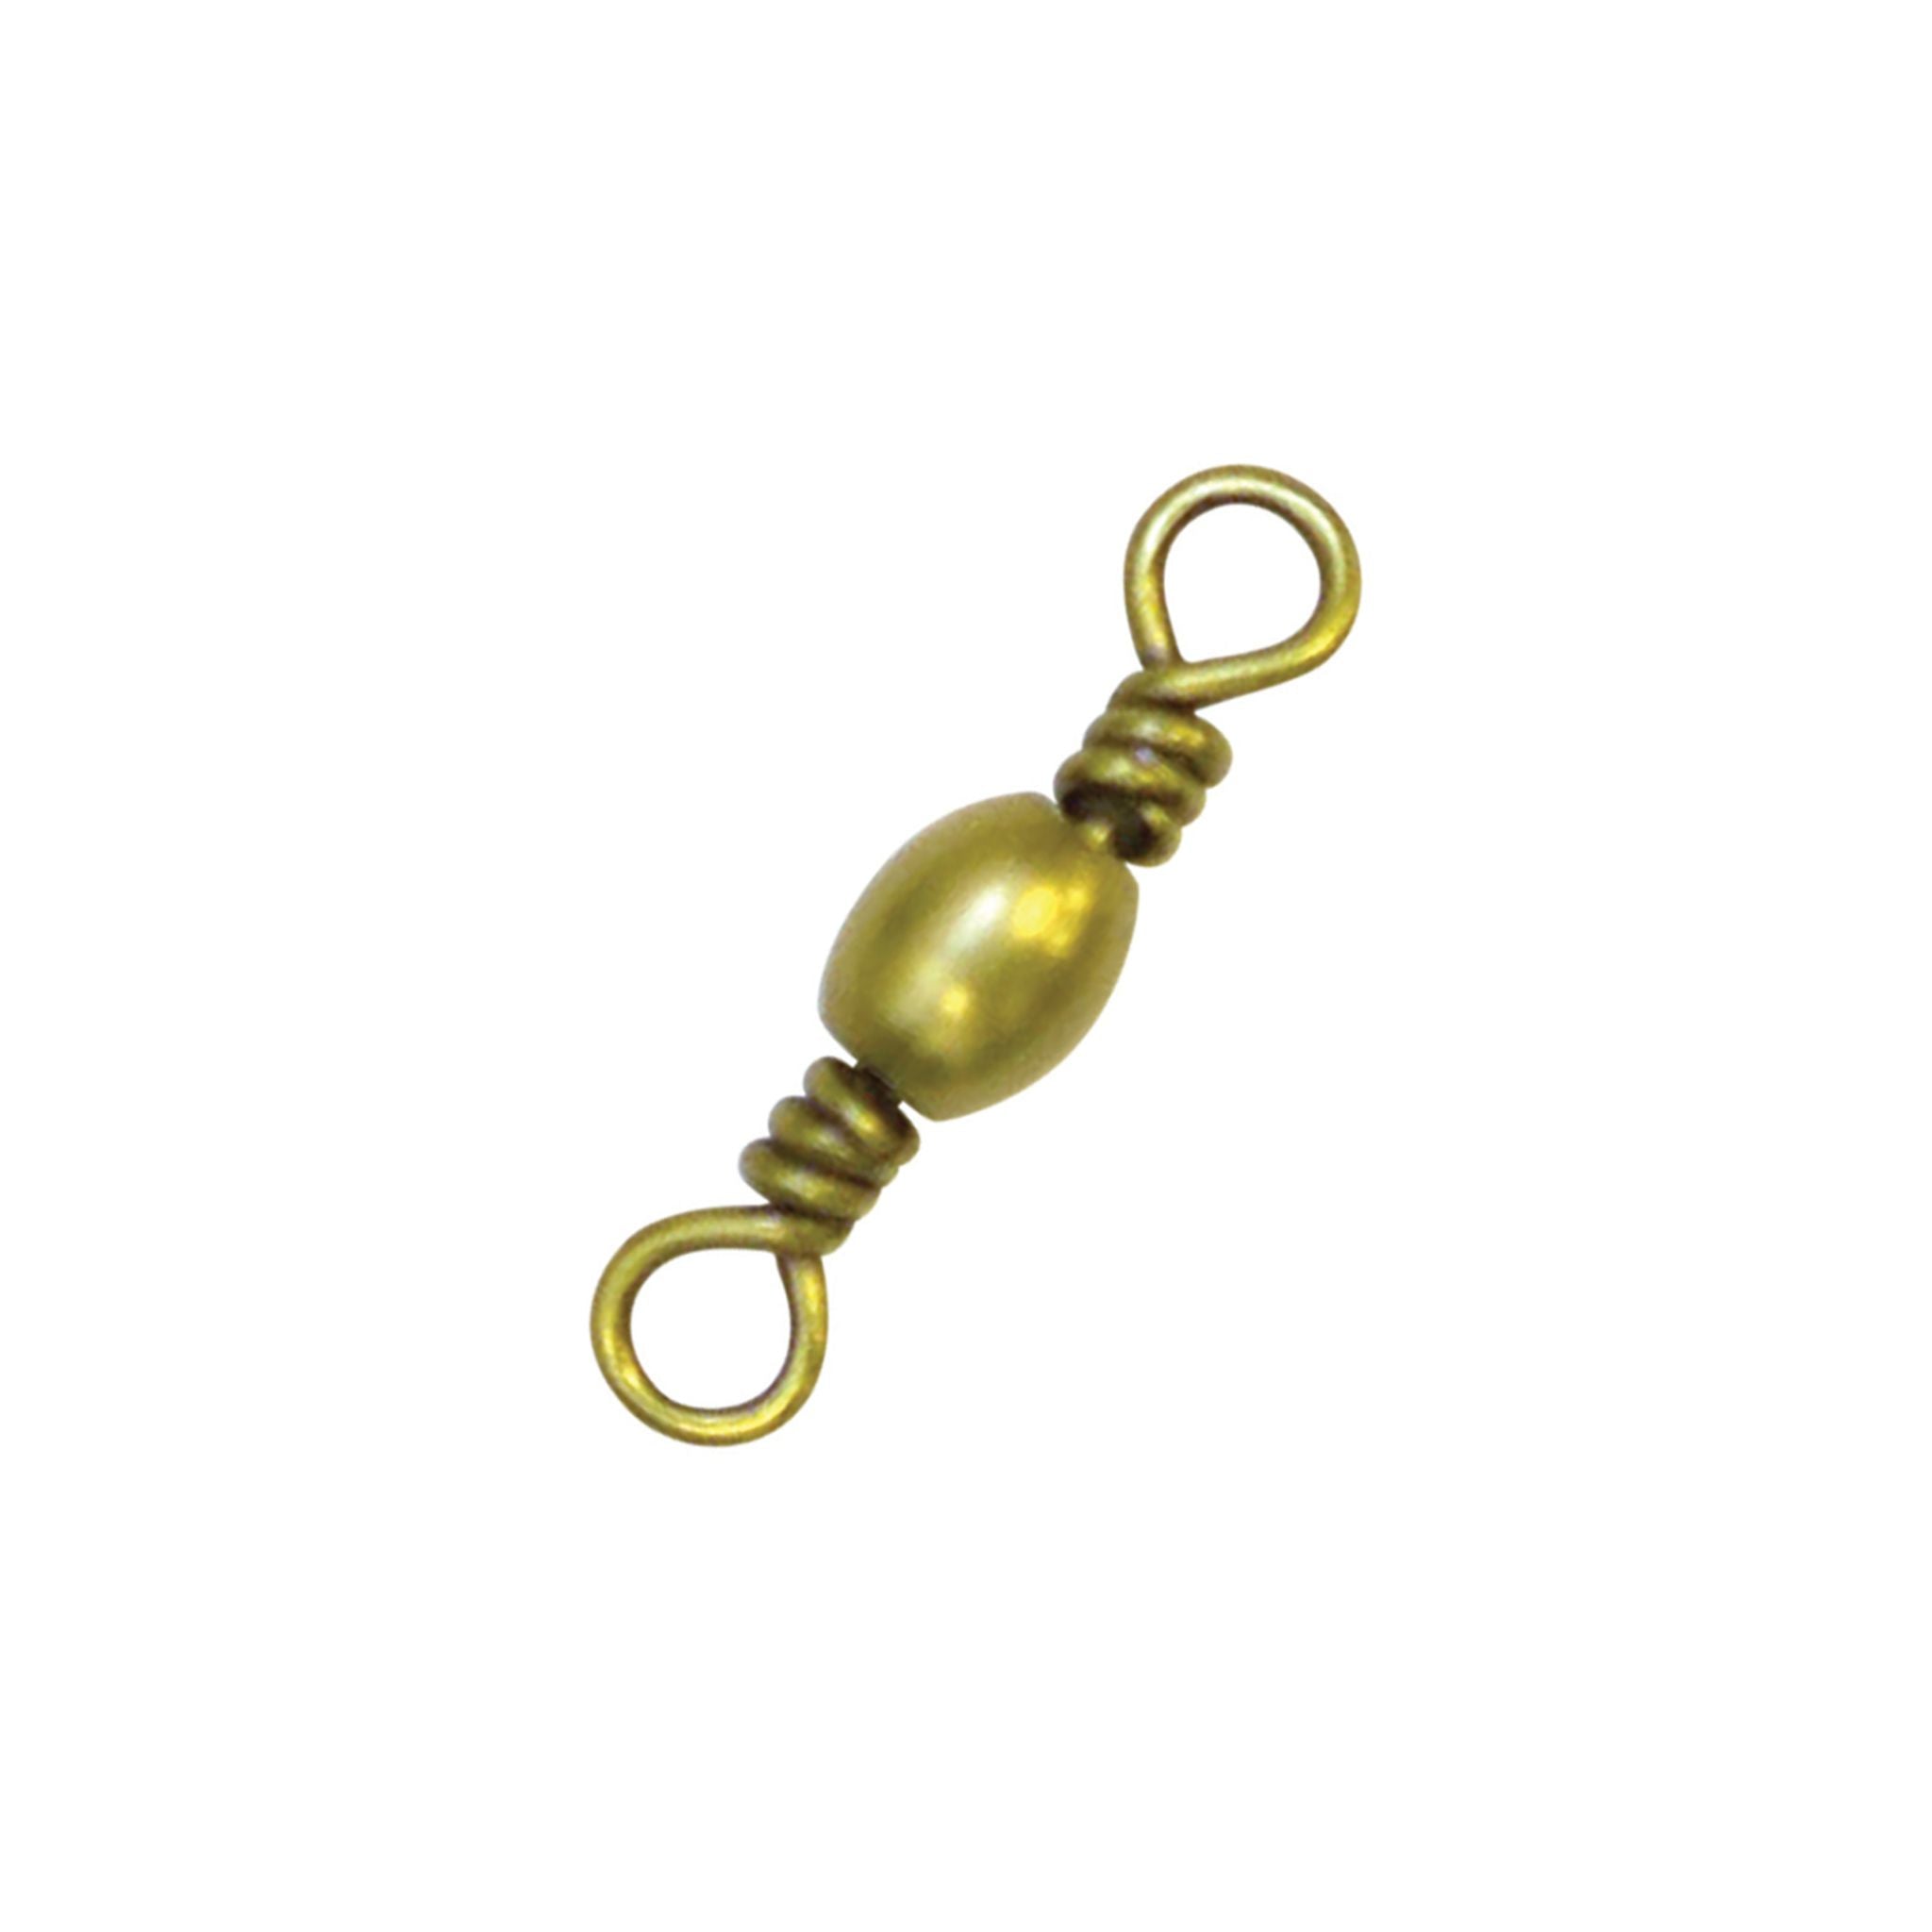 Eagle Claw 01141-001 Brass Barrel Swivel with Safety Snap - Size 1